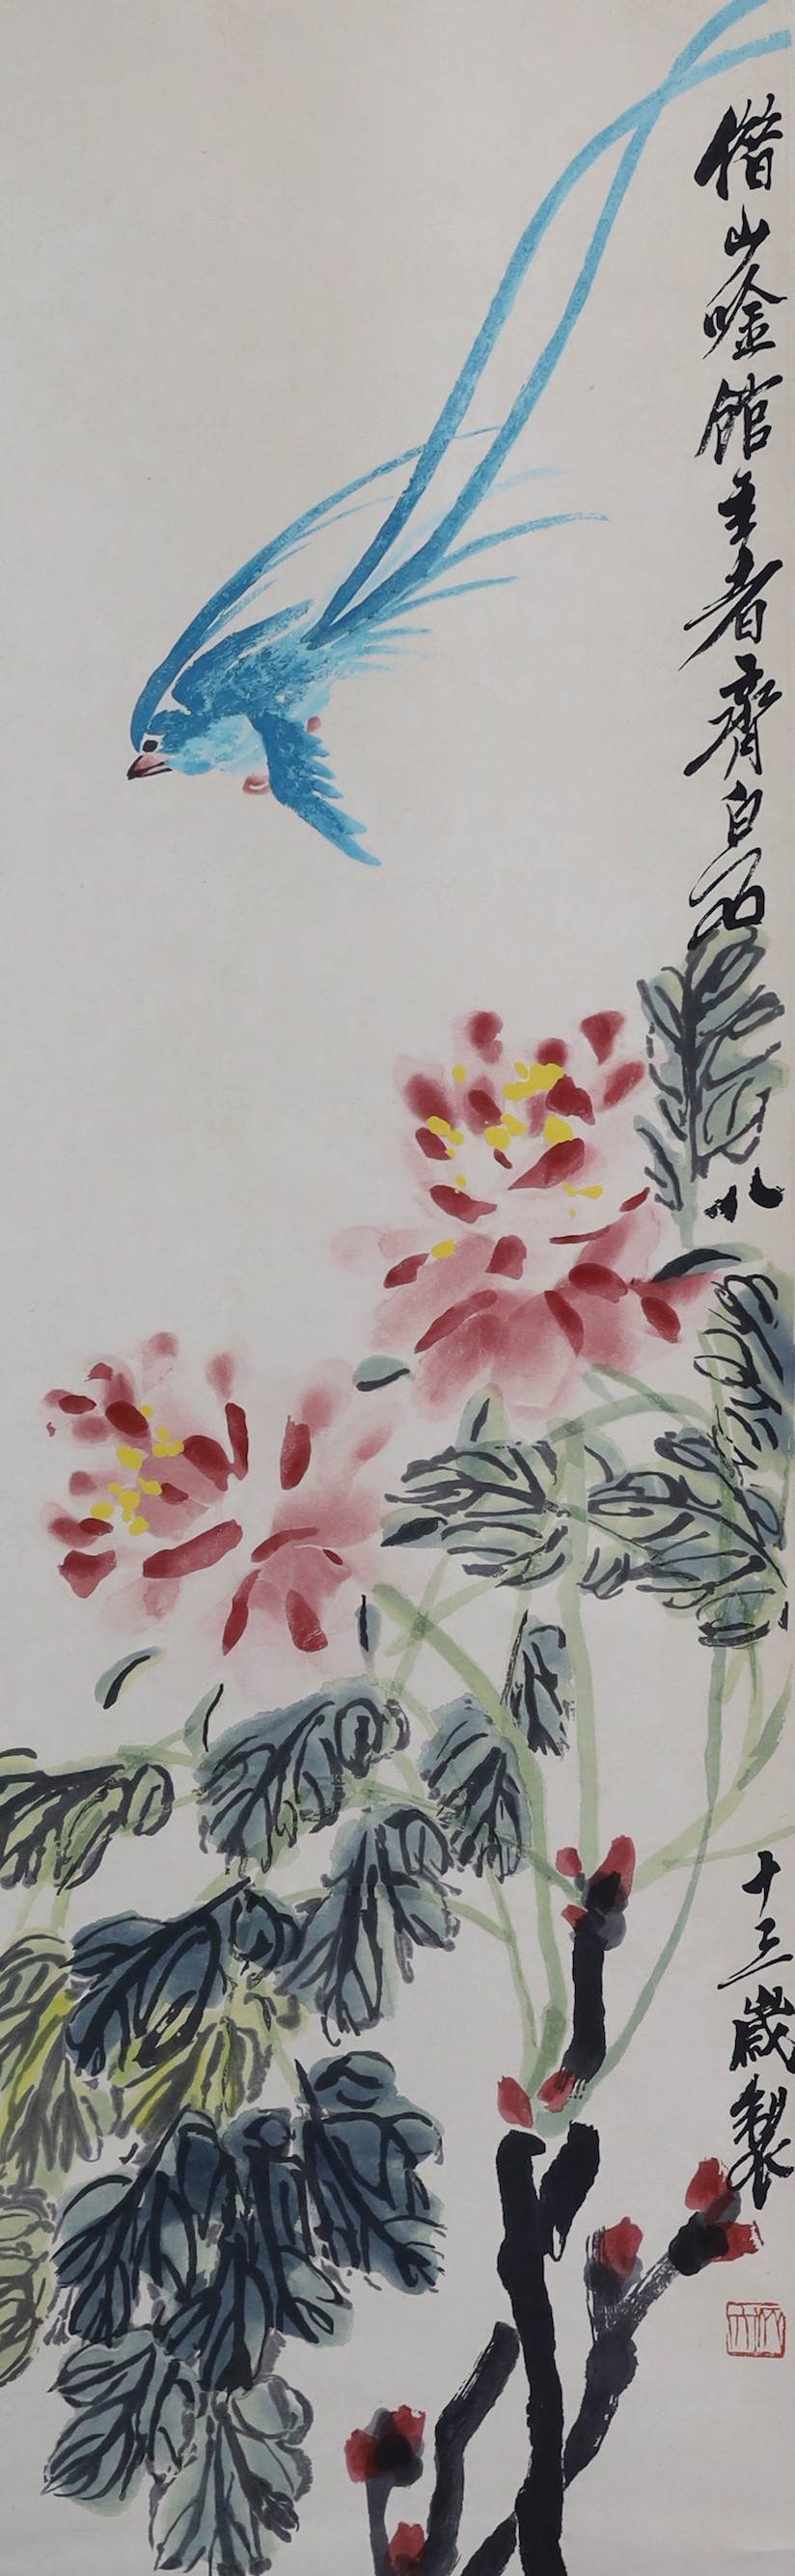 After Qi Baishi (1863-1957), Ribbon peonies, scroll picture , published by Tianjin Arts & Crafts Export Company, 1959, image 104cm x 33cm